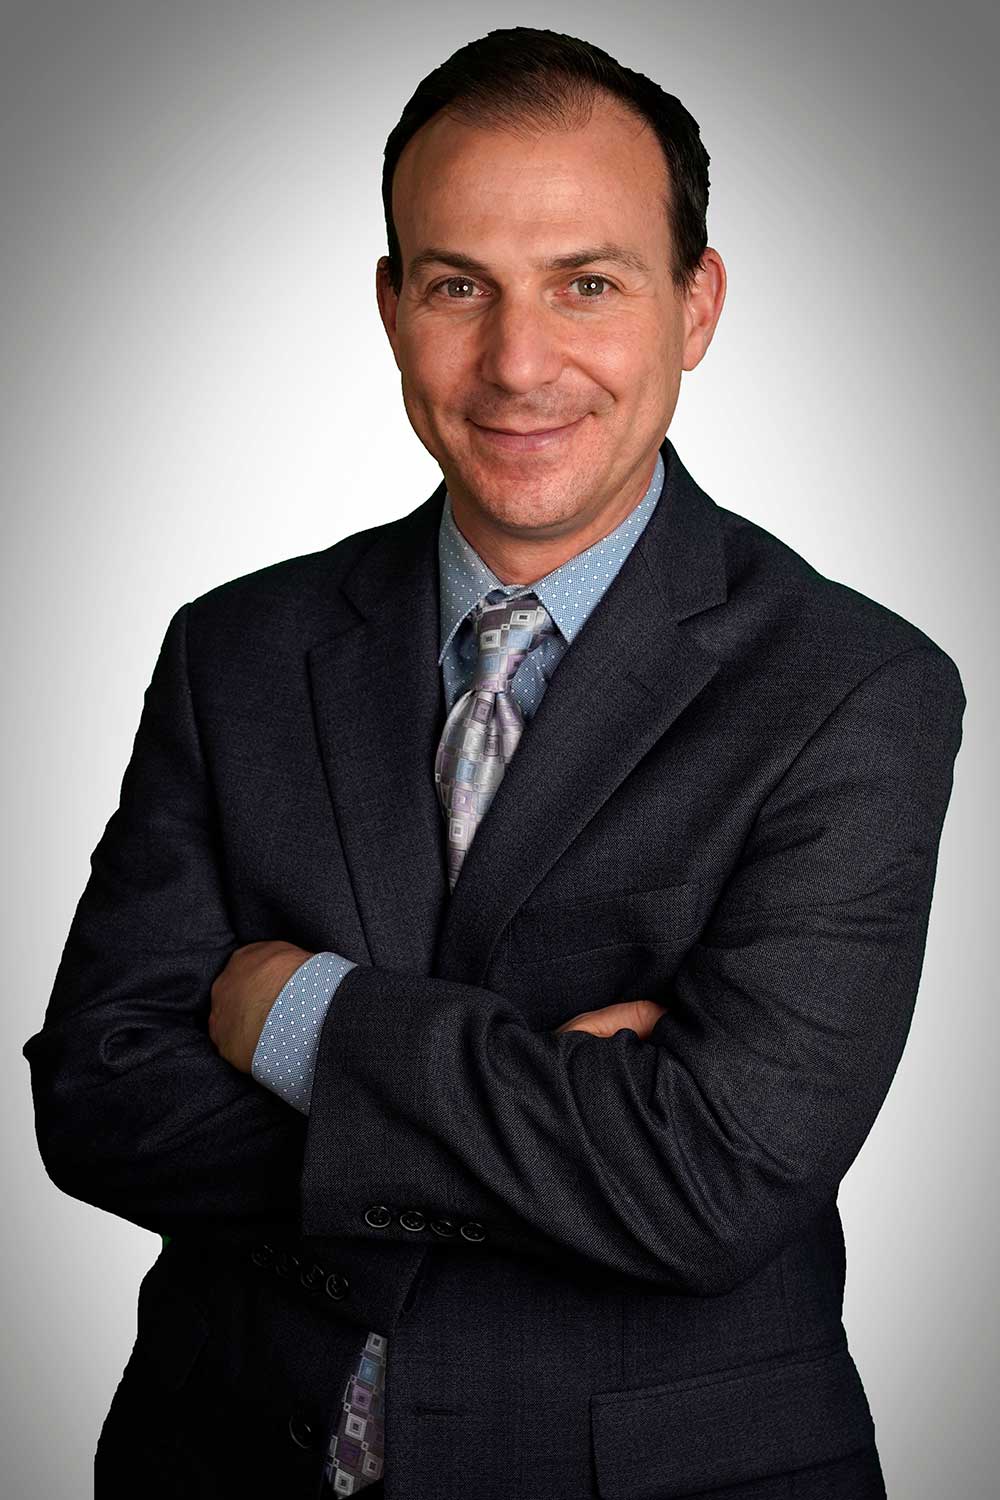 Headshot of chief neurosurgeon Scott Anderson wearing a suit and smiling.